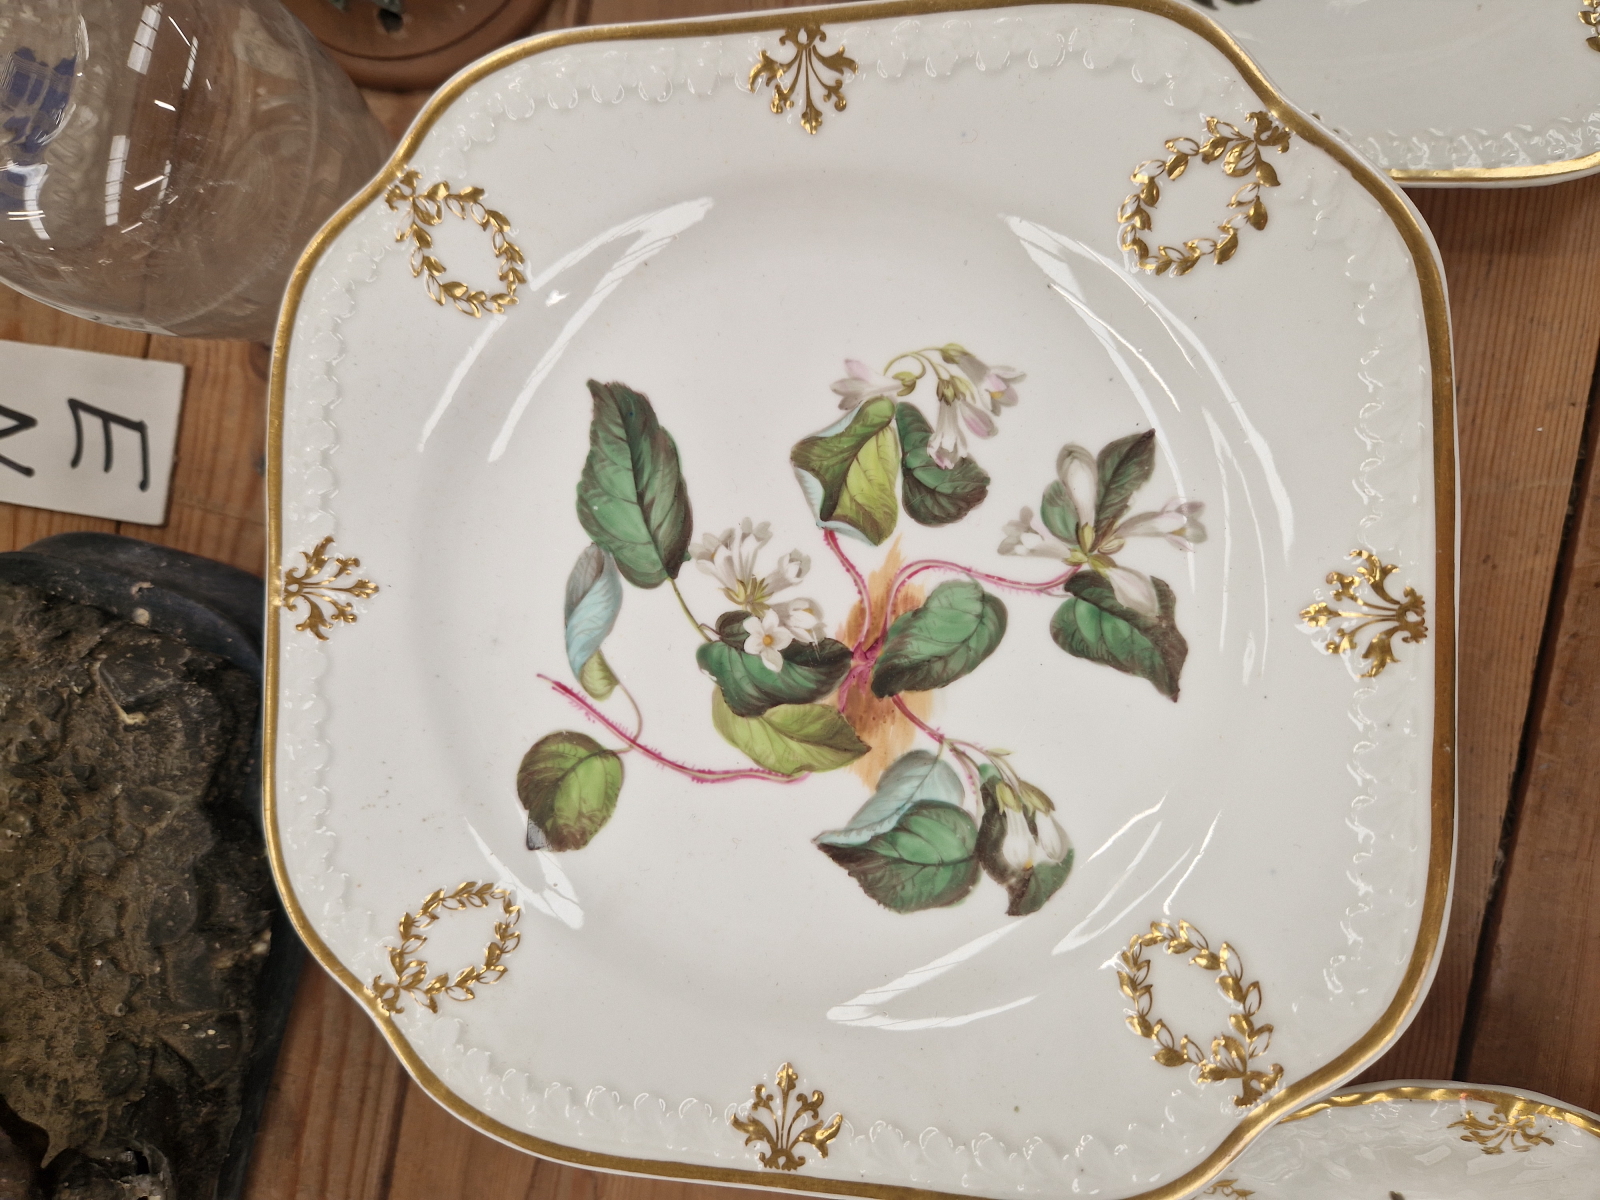 A FINE EARLY 19th C. PORCELAIN DESSERT SERVICE, HAND PAINTED WITH NAMED FLORAL BOTANICAL SPECIMENS - Image 22 of 58